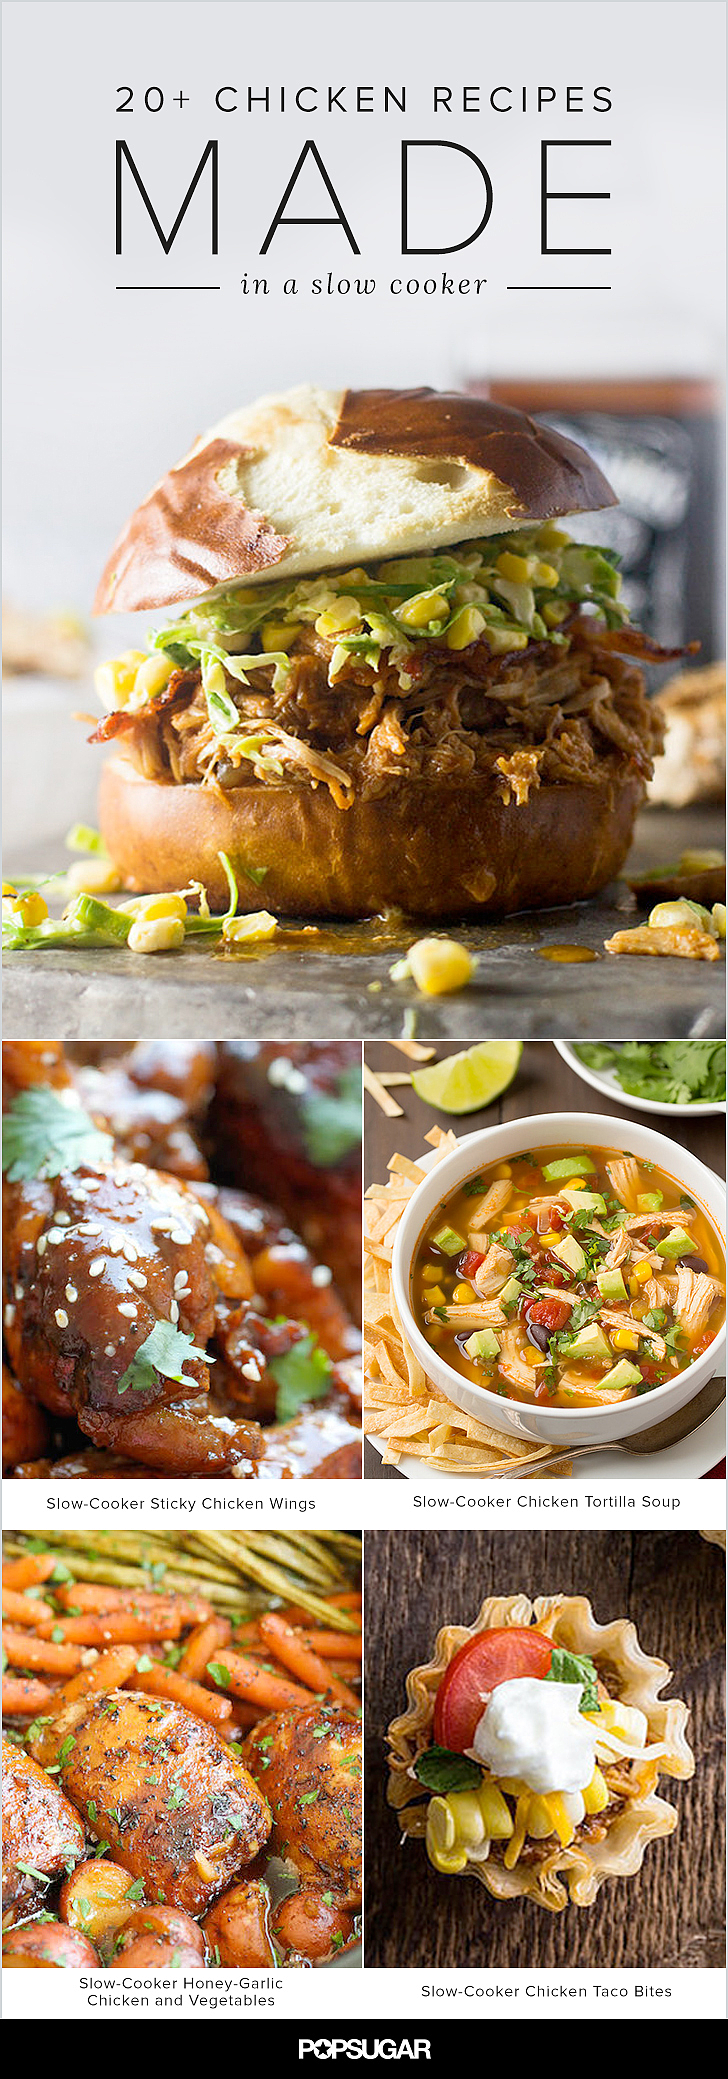 Get the recipes: slow cooker chicken recipes